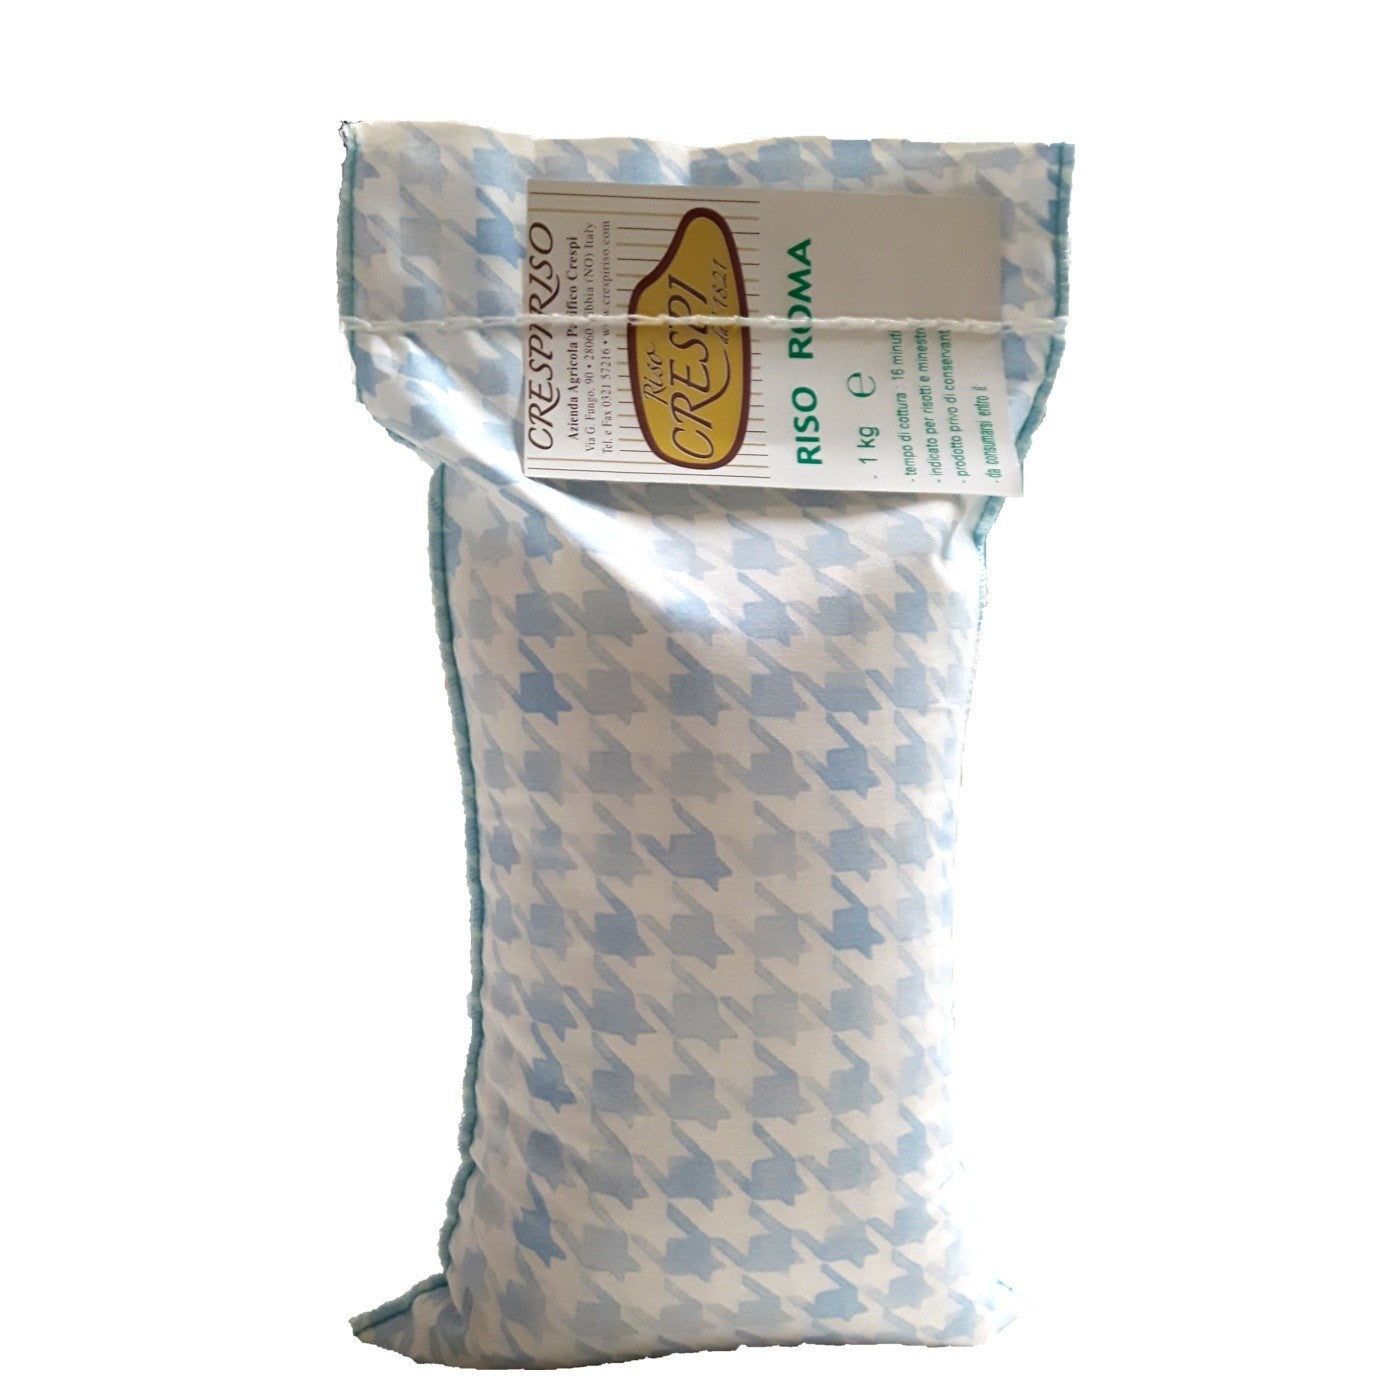 Roma crespiriso rice 1kg natural cotton package